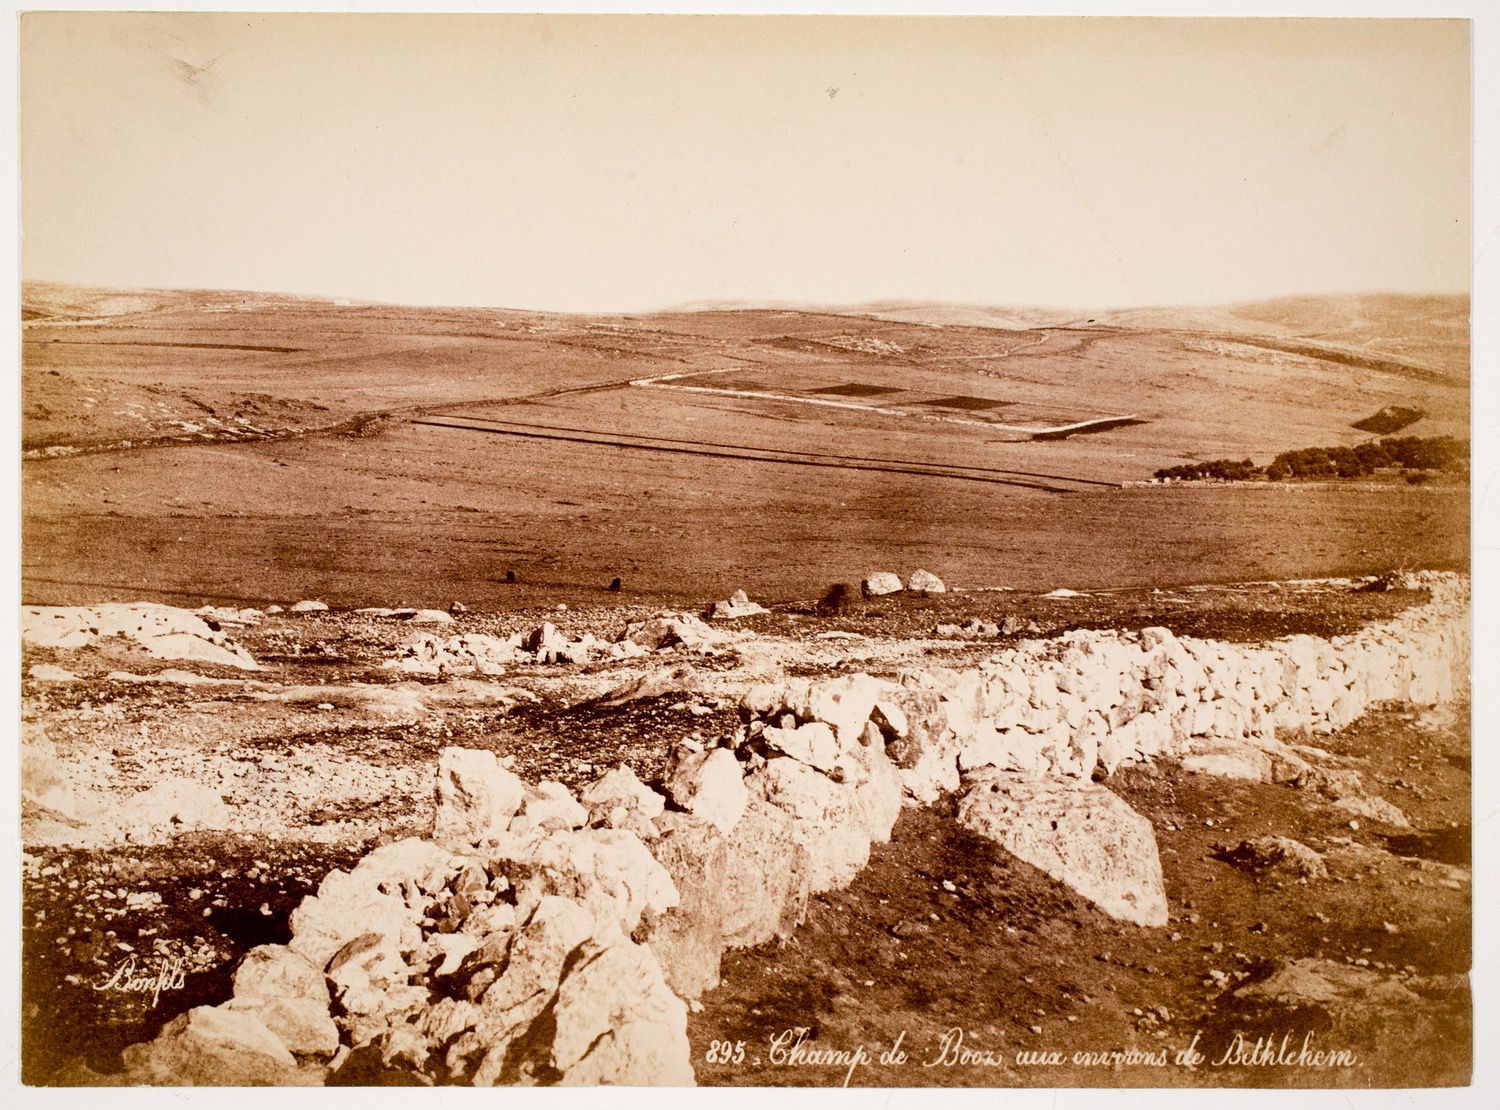 landscape view of the Fields of Boaz